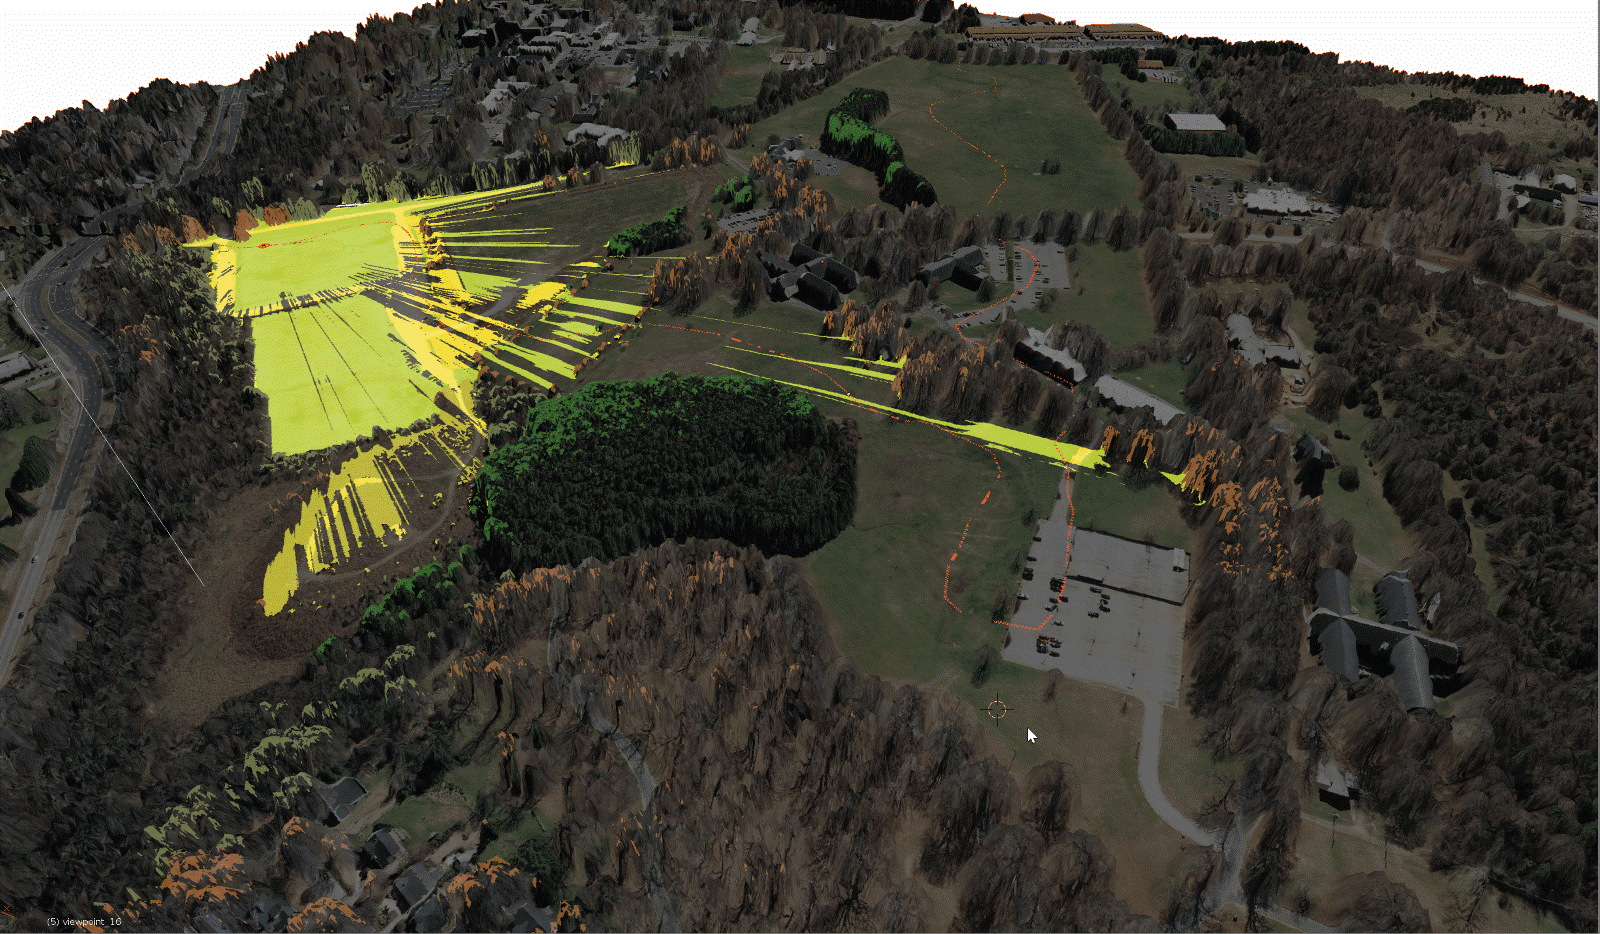 Drone Imaging Results With OpenDroneMap | Blend4Web